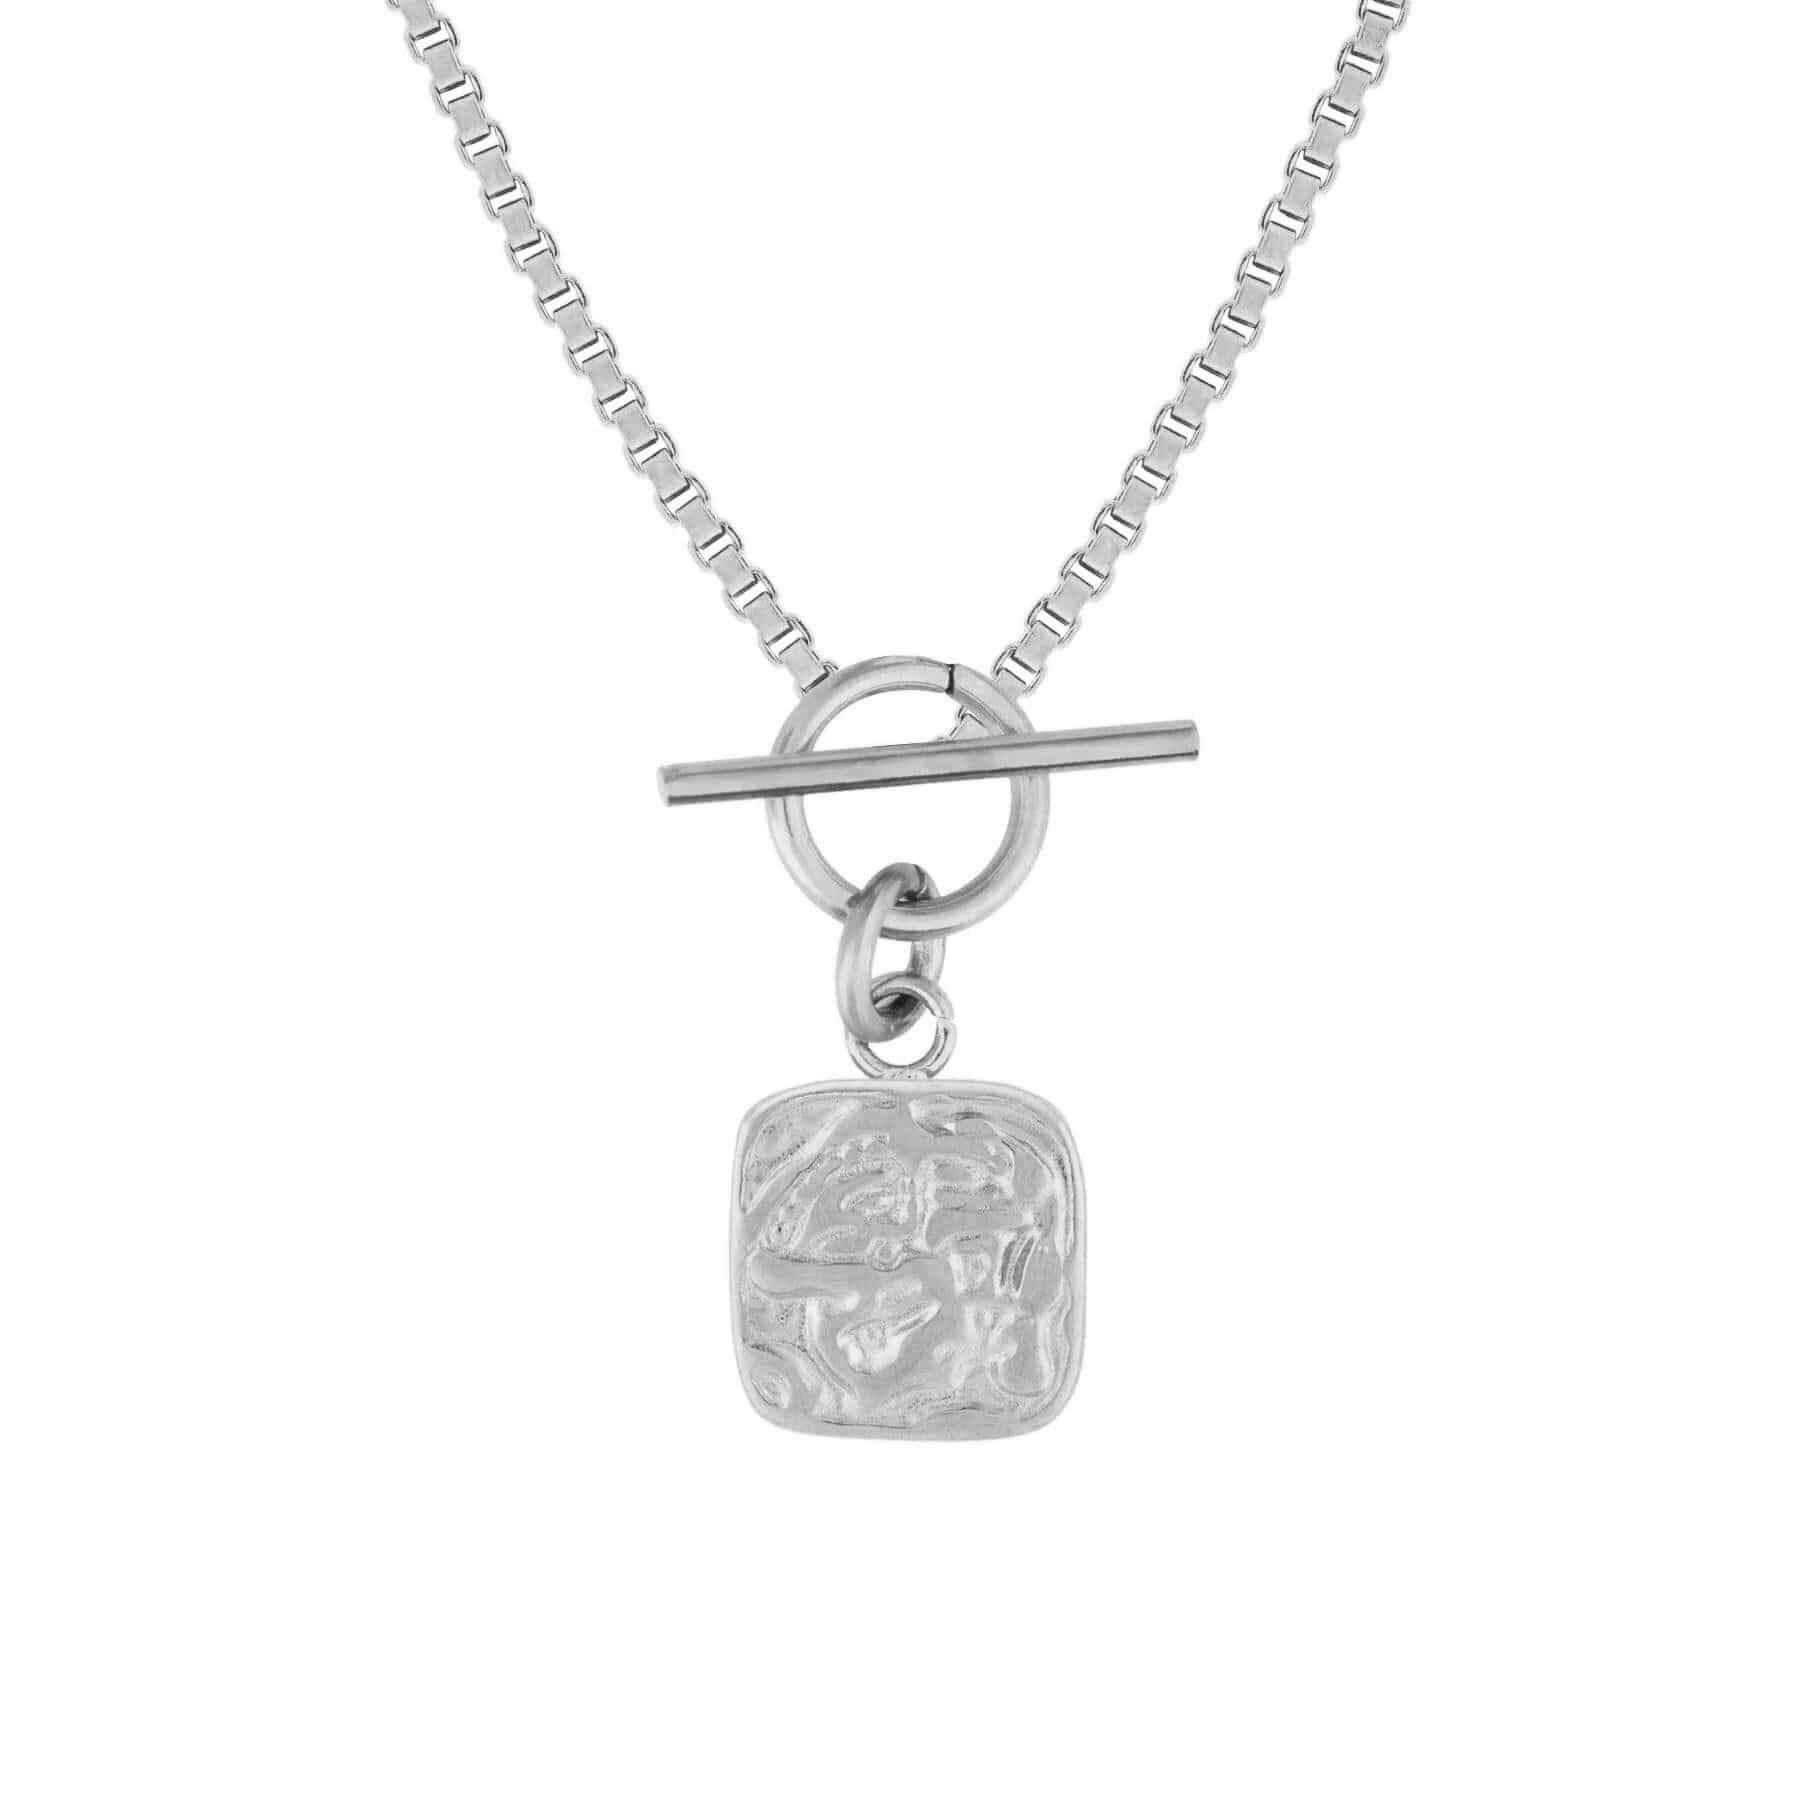 BohoMoon Stainless Steel Cayman Tbar Necklace Silver